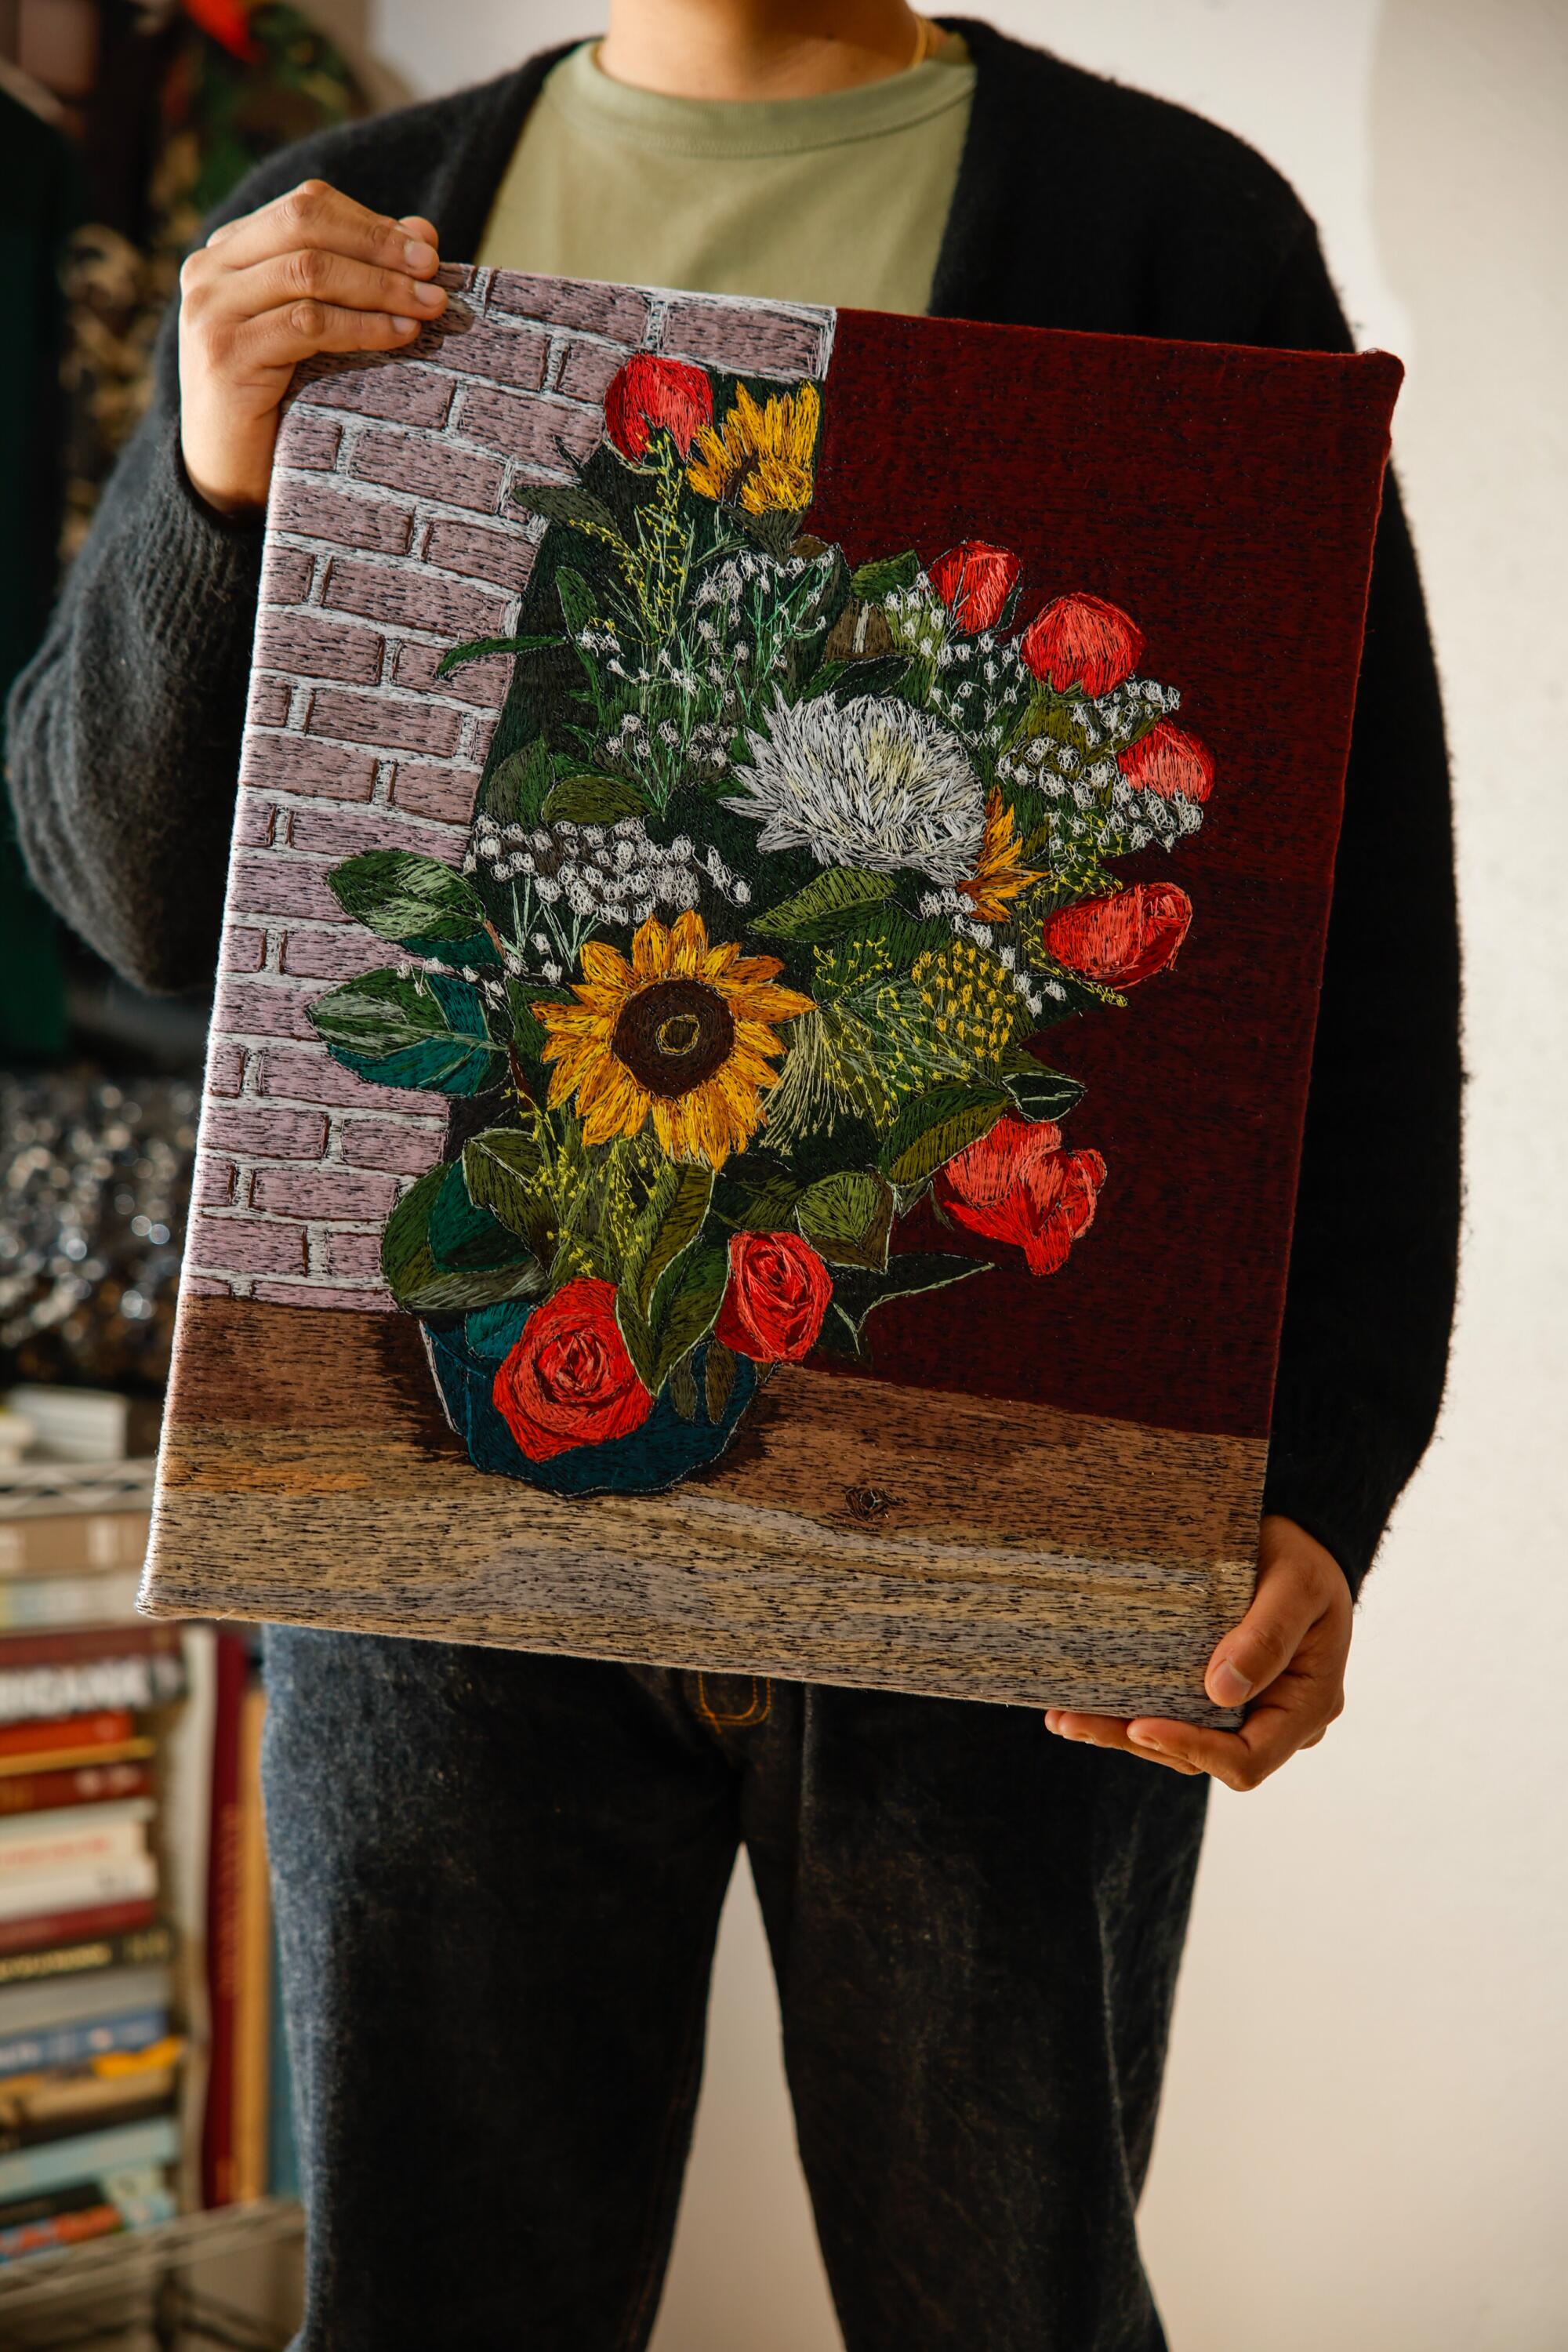 Artist Erick Medel holds one of his textile art pieces 